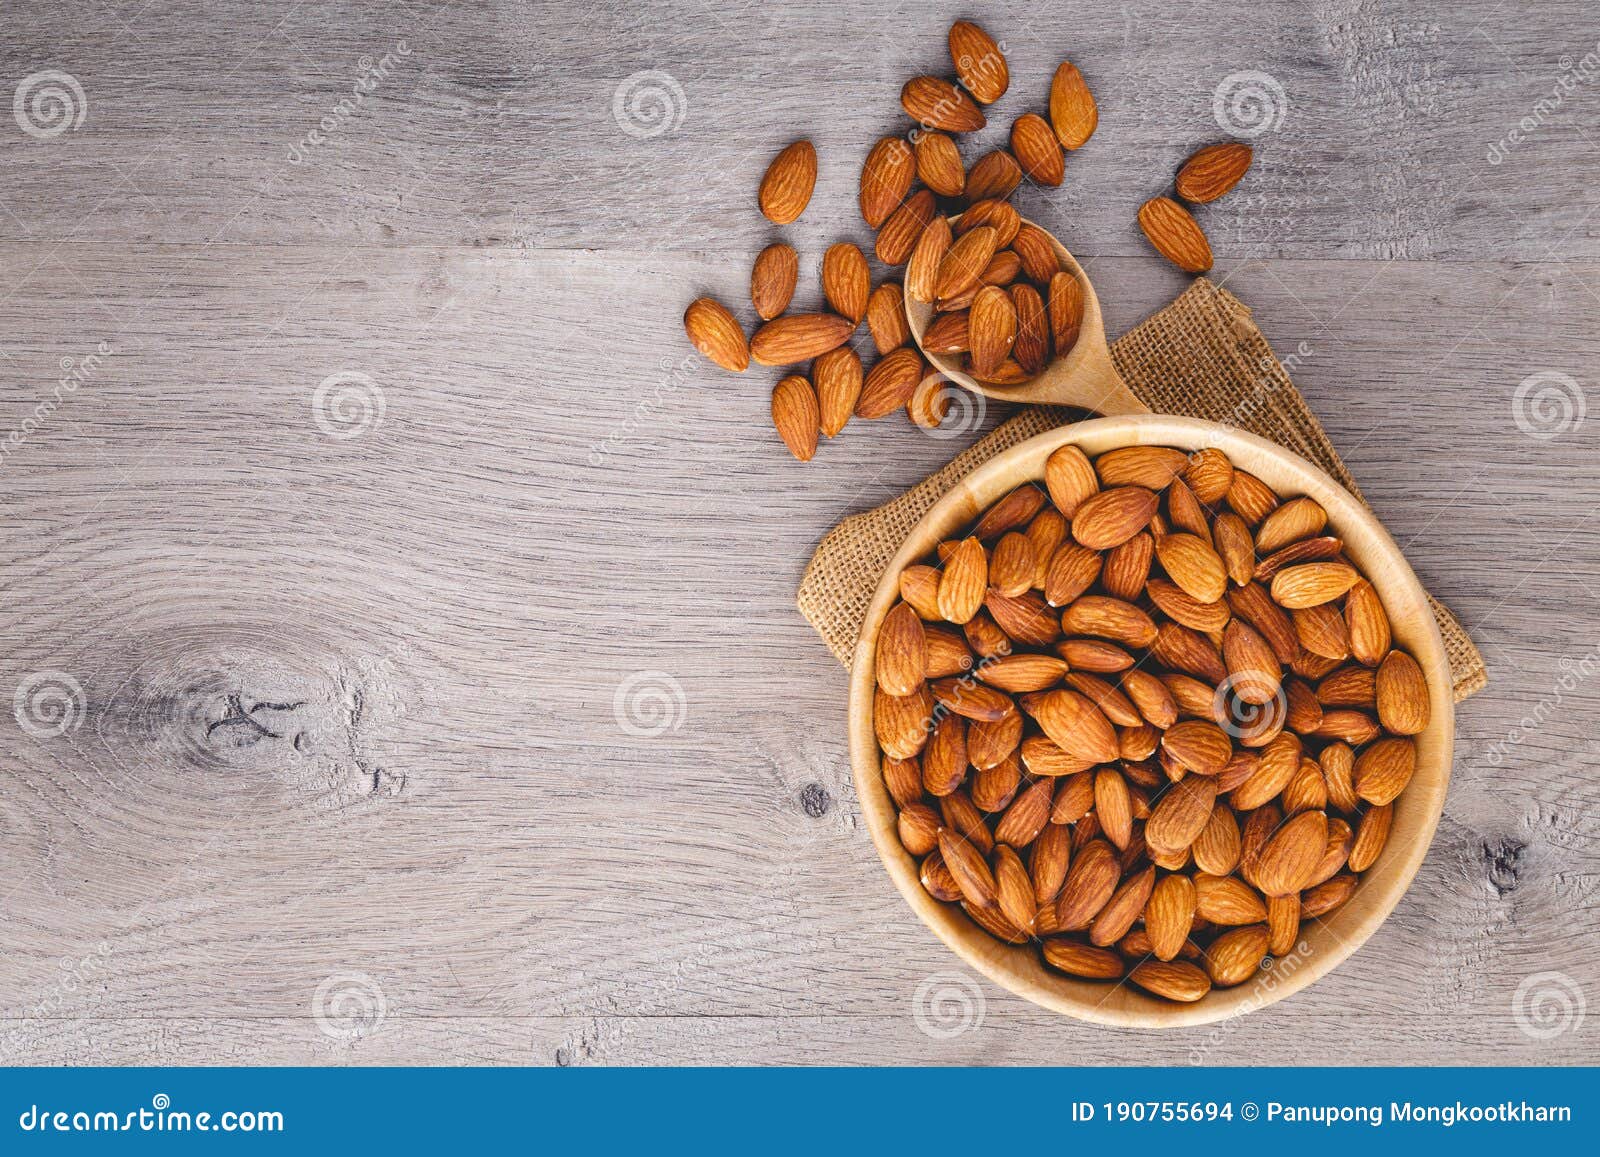 top view of almonds on wooden table with wood spoon or scoop